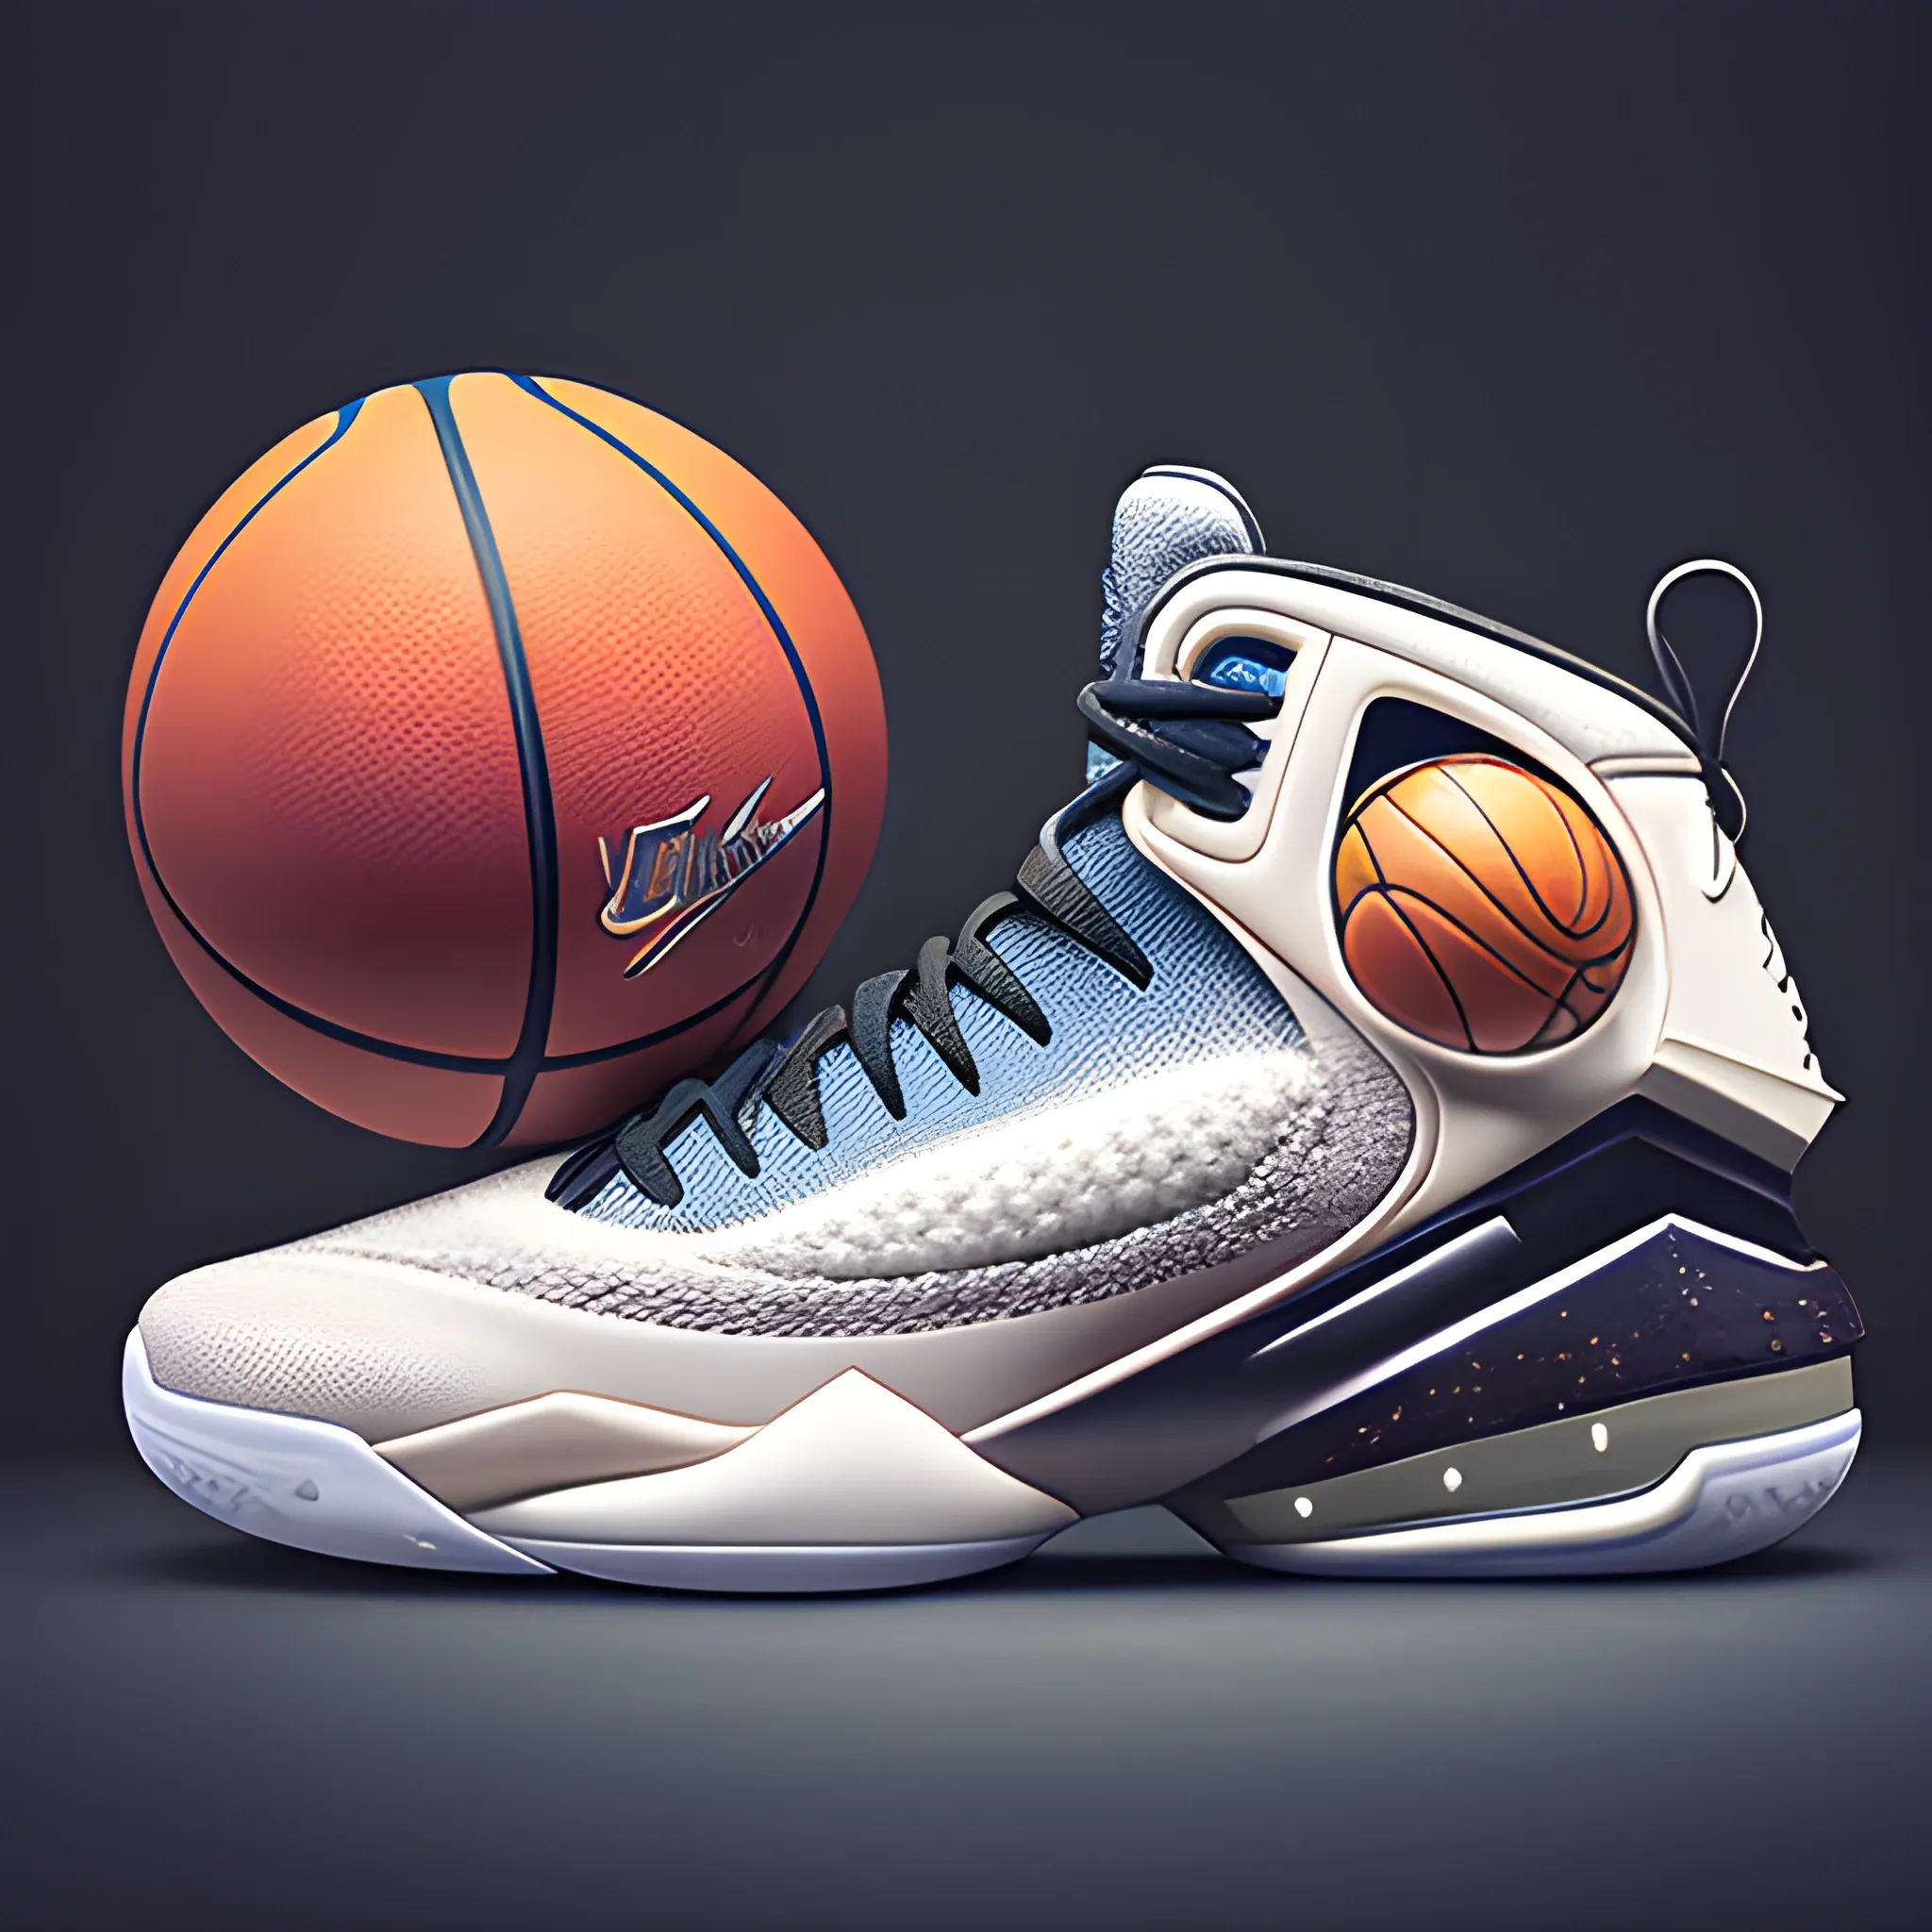 Surreal and heavy detailed ball space basketball shoes product p